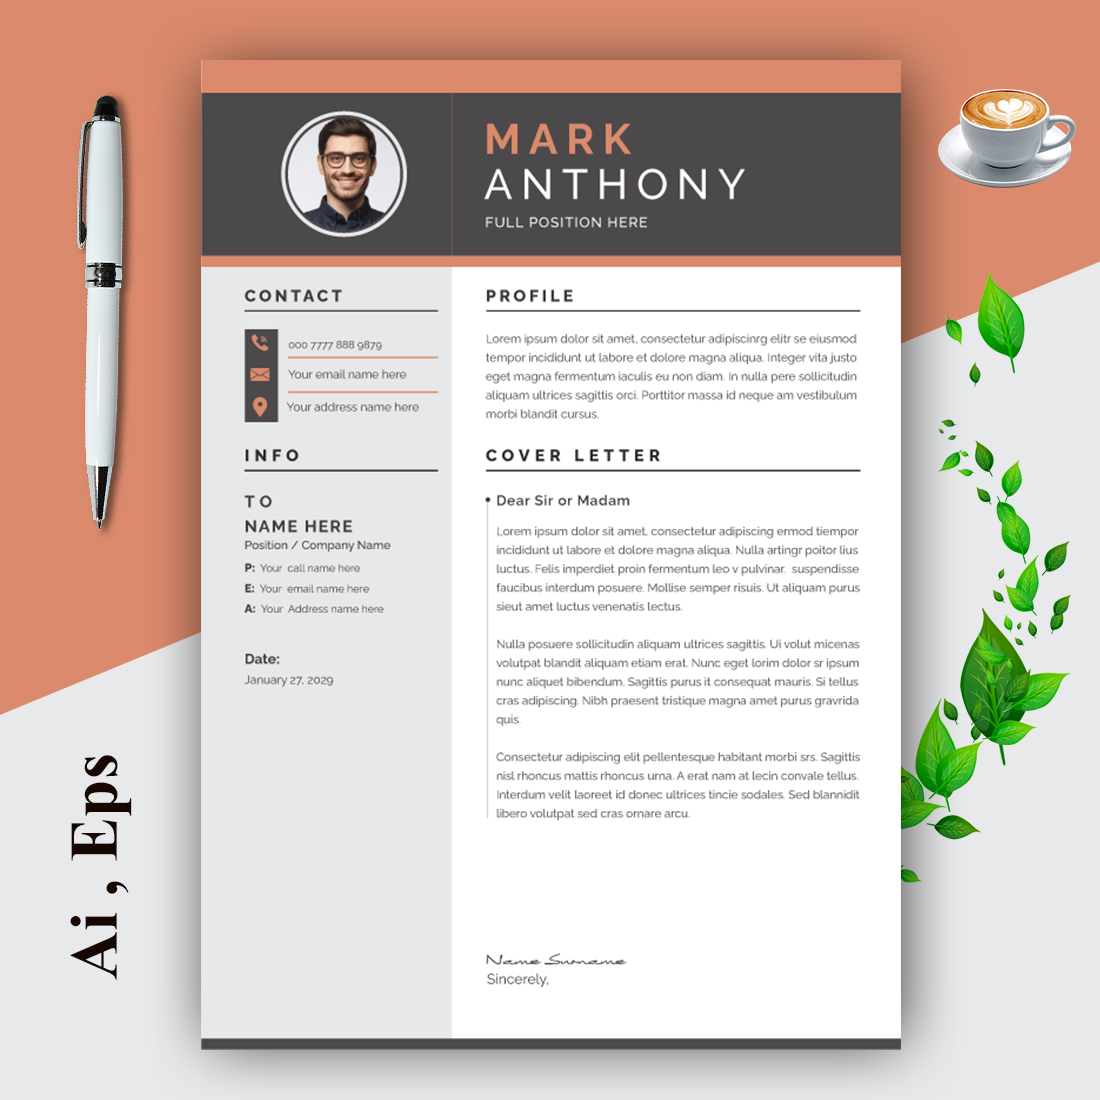 Resume and Cover Letter Layout preview image.